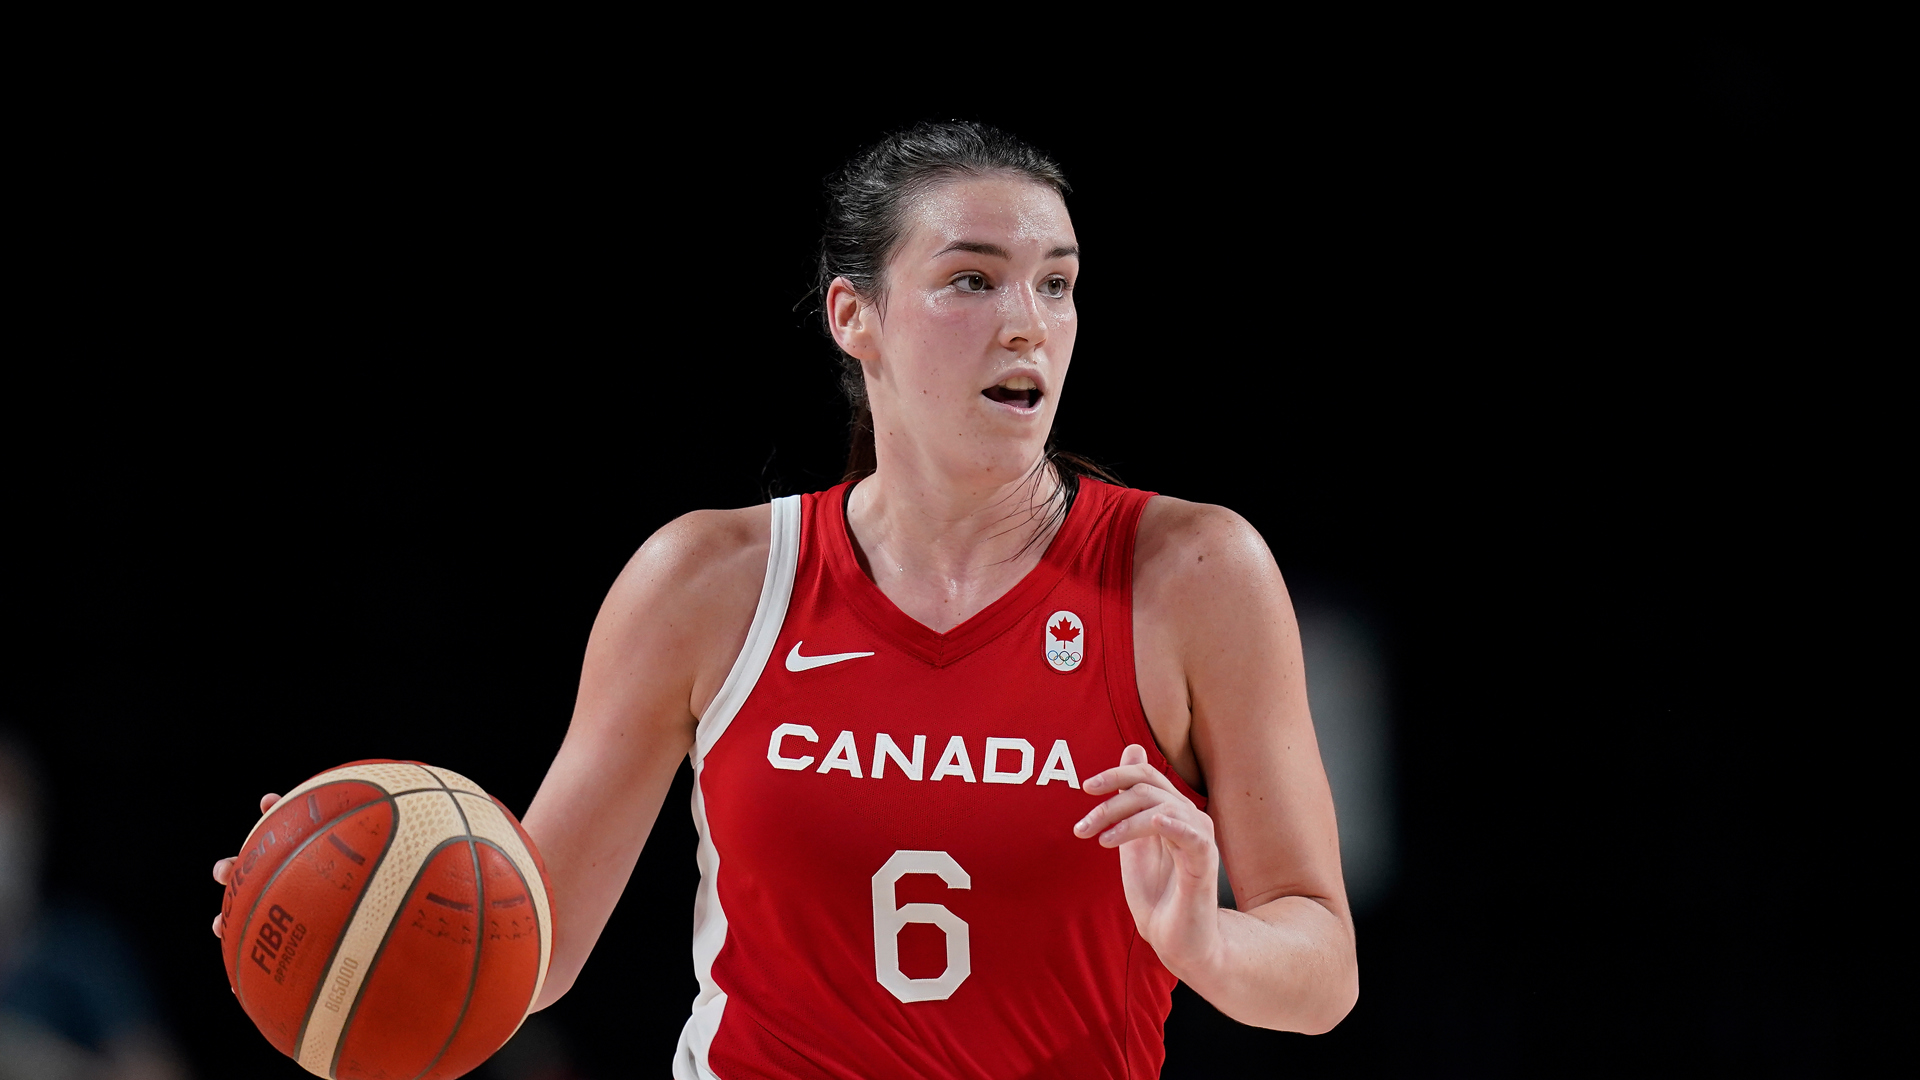 The Lynx guard is enjoying a breakout season, and will return to the Olympics as a member of Team Canada.